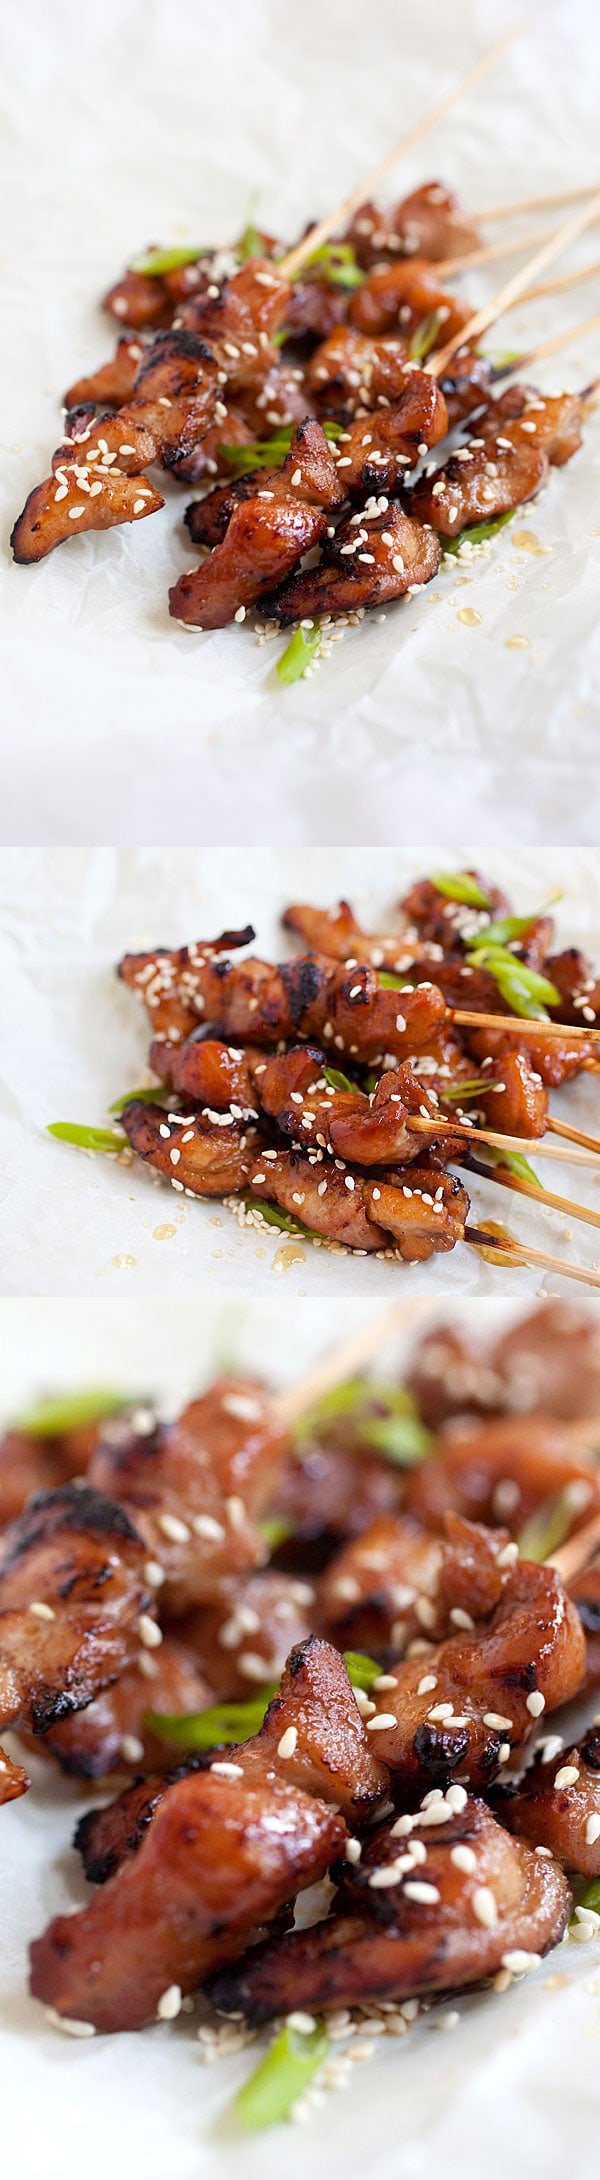 Honey Sesame Chicken Skewers - sticky sweet and savory chicken on skewers. So easy to make, so delicious that you won't stop eating | rasamalaysia.com